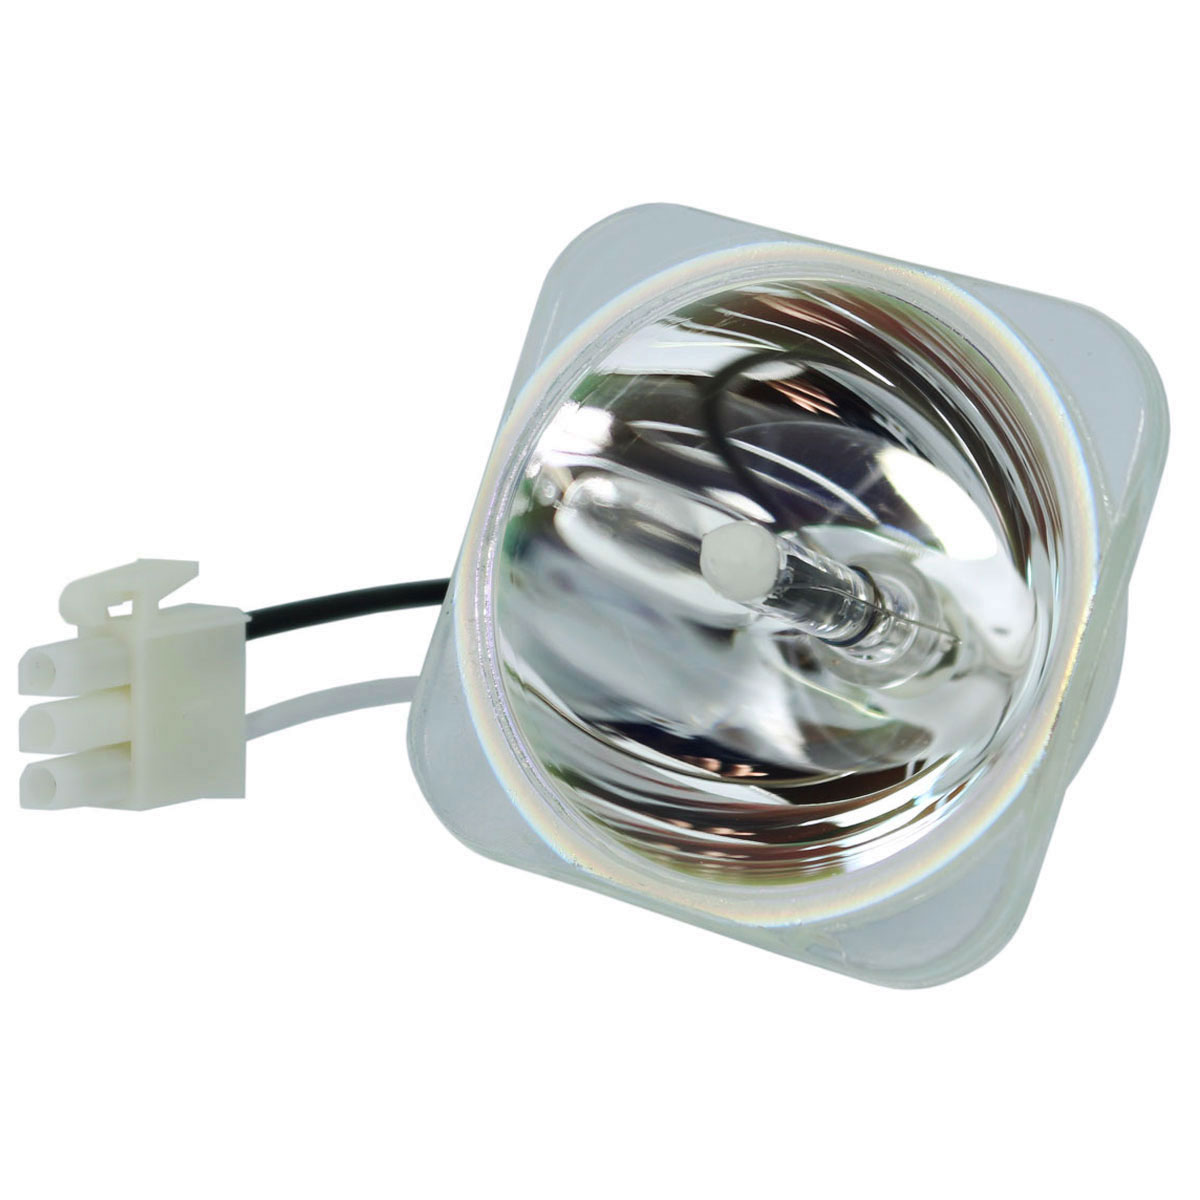 Lutema Economy Bulb for BenQ 5J.J4S05.001 Projector (Lamp Only) - image 1 of 6